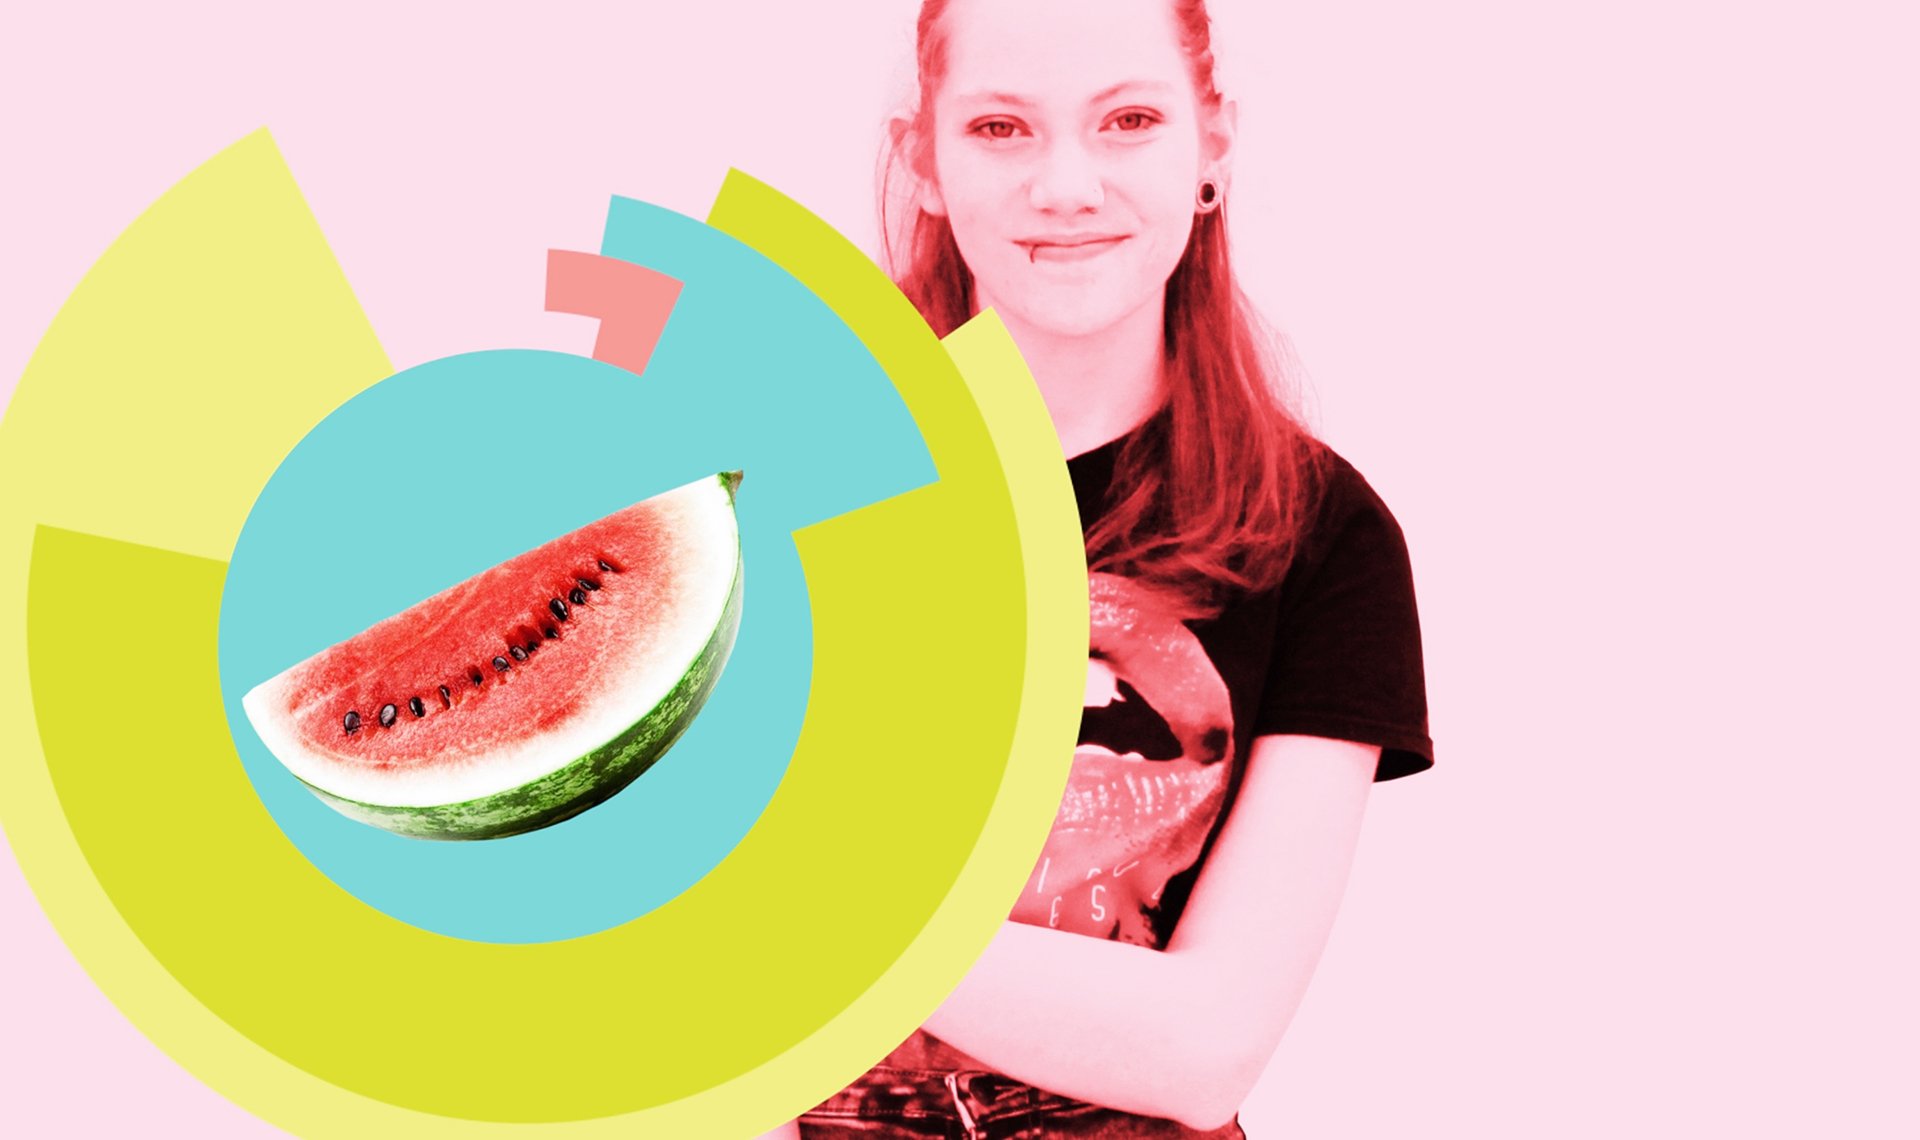 Young Woman next to bright image of a watermelon to promote healthy eating